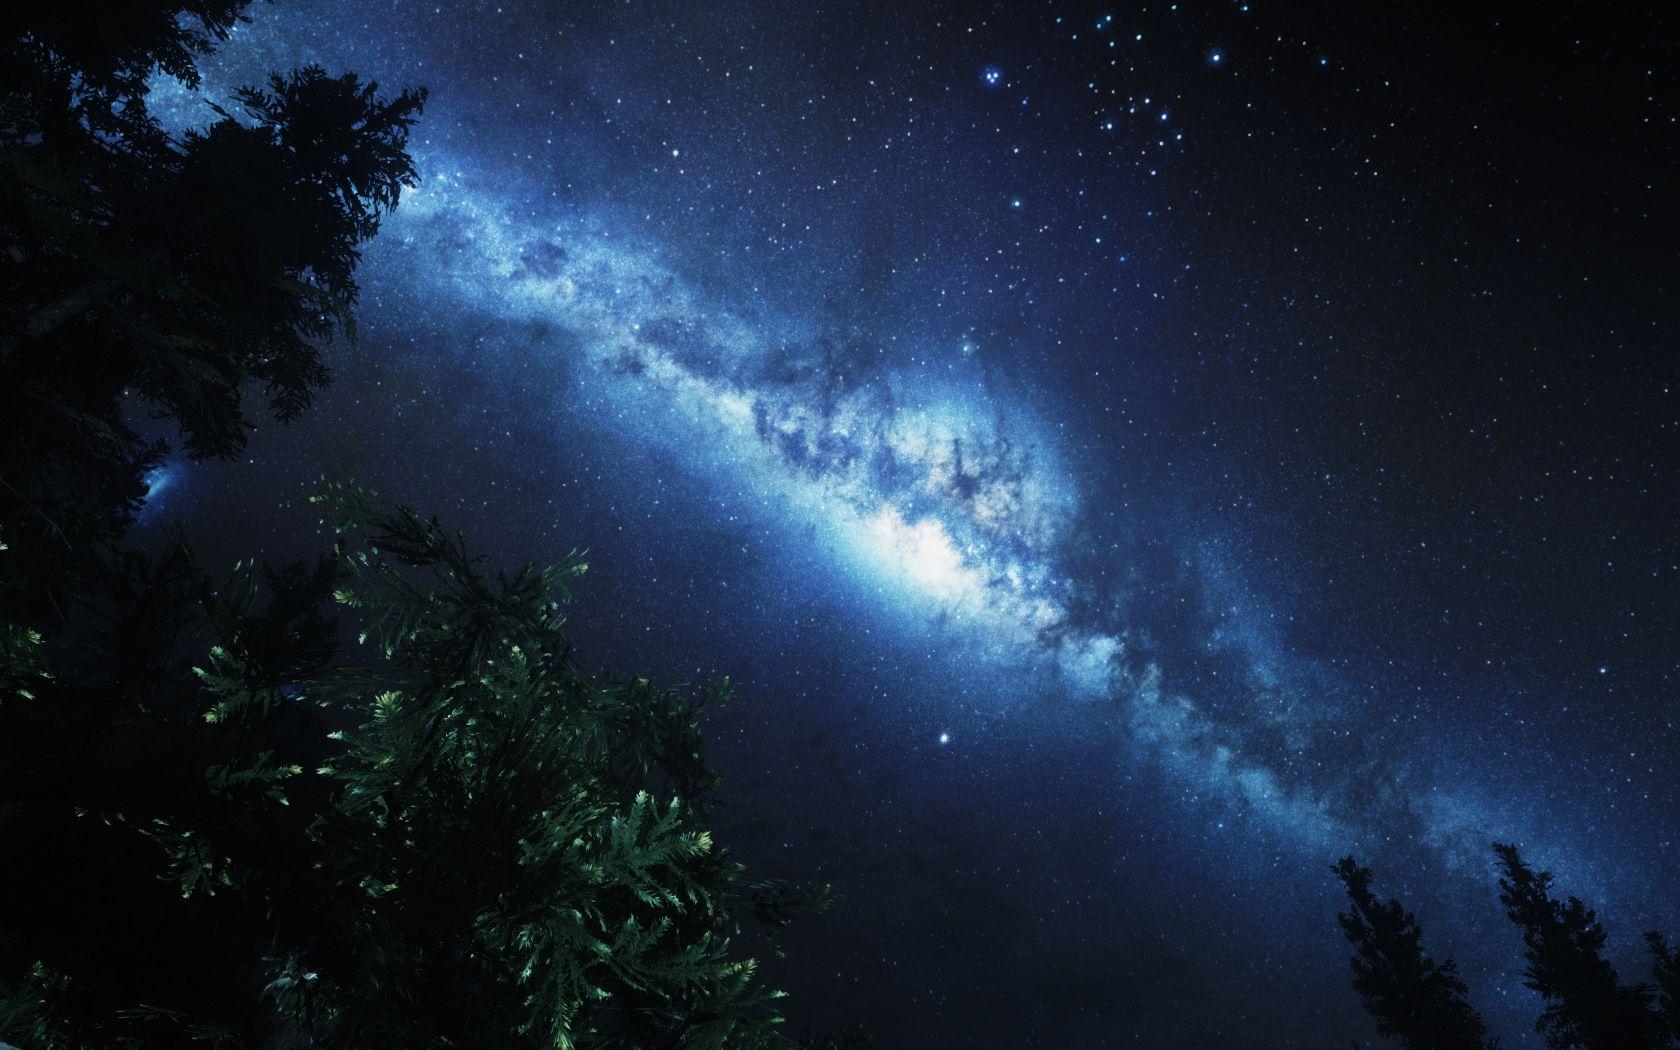 Milky Way Photos Hd For Desktop Backgrounds 13 HD Wallpapers.